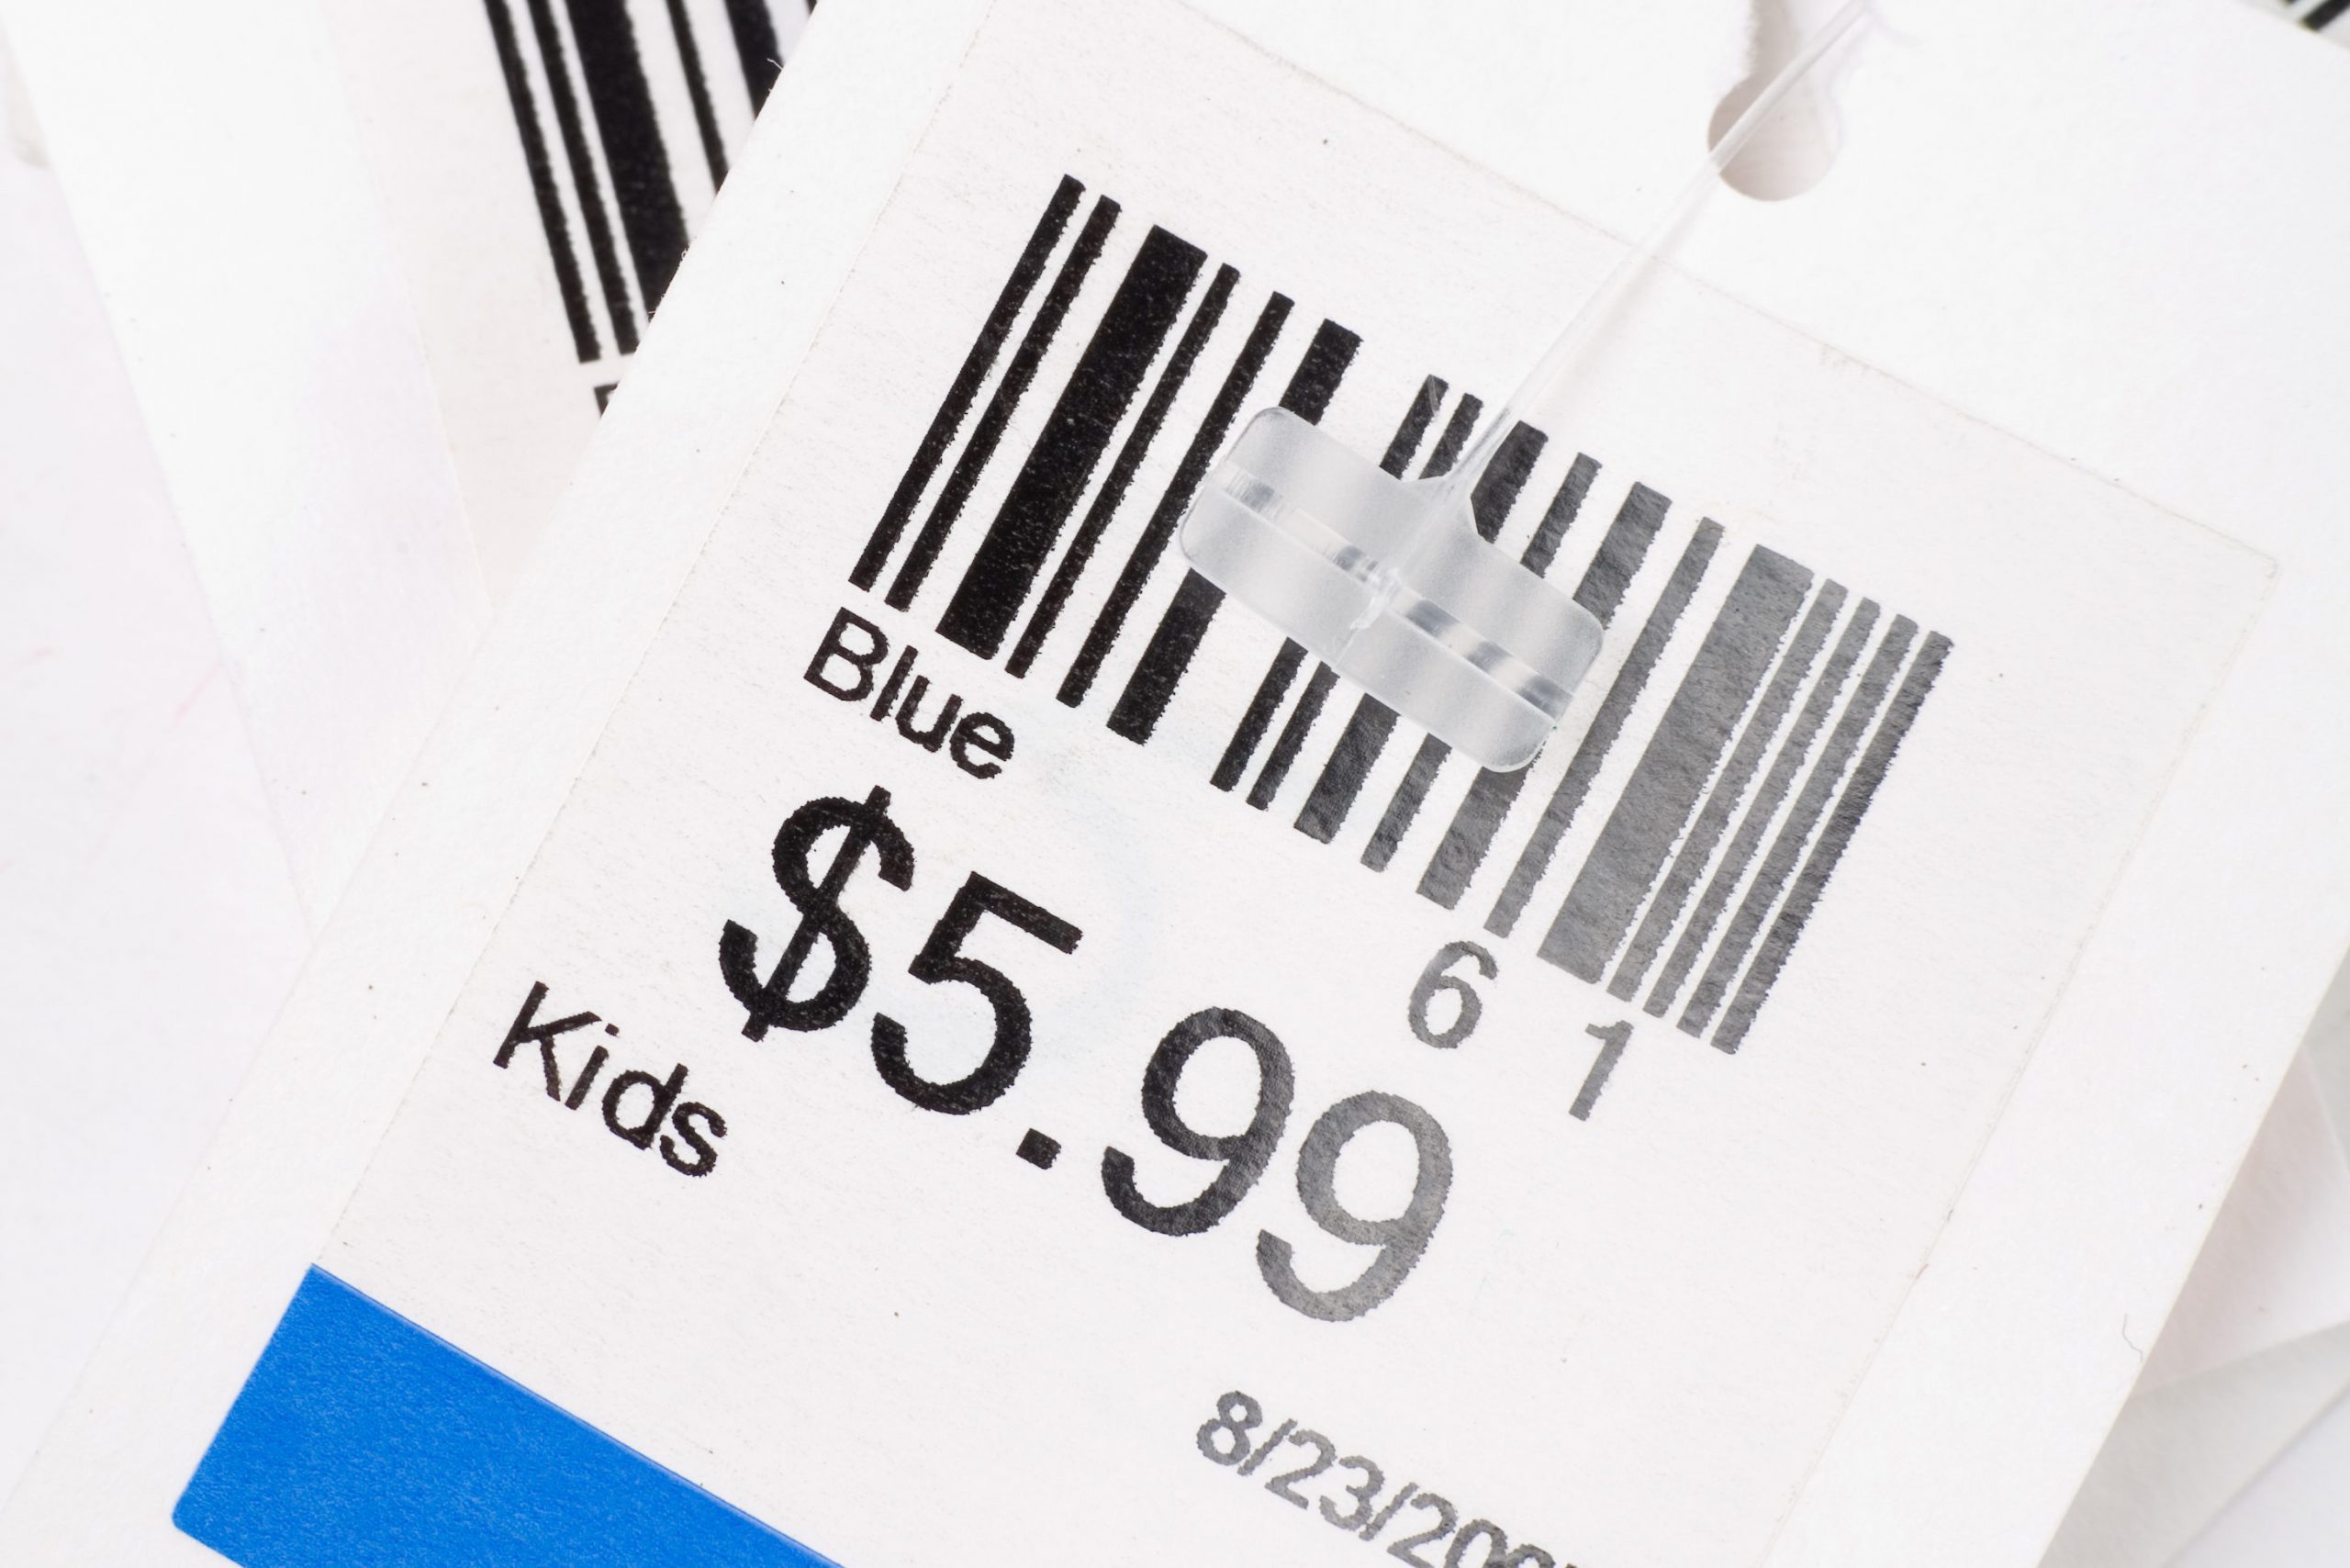 Real Price Tag With Barcode